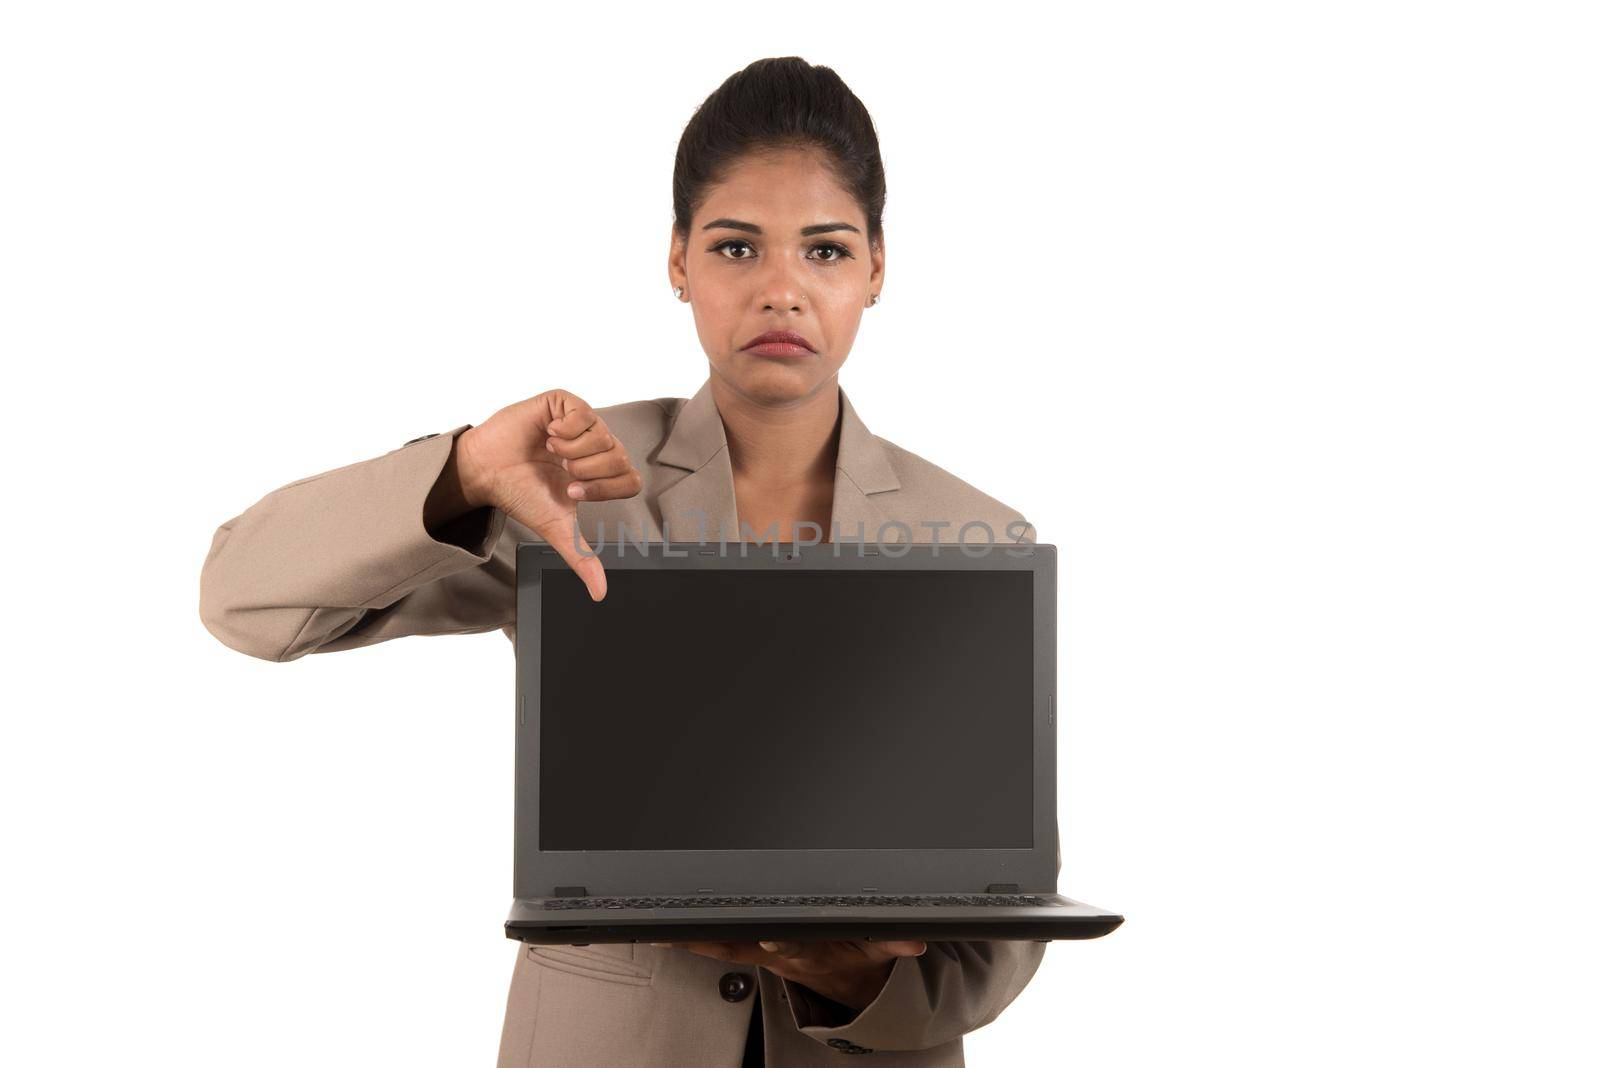 Unhappy business woman holding laptop and showing thumbs down isolated on a white background by DipakShelare